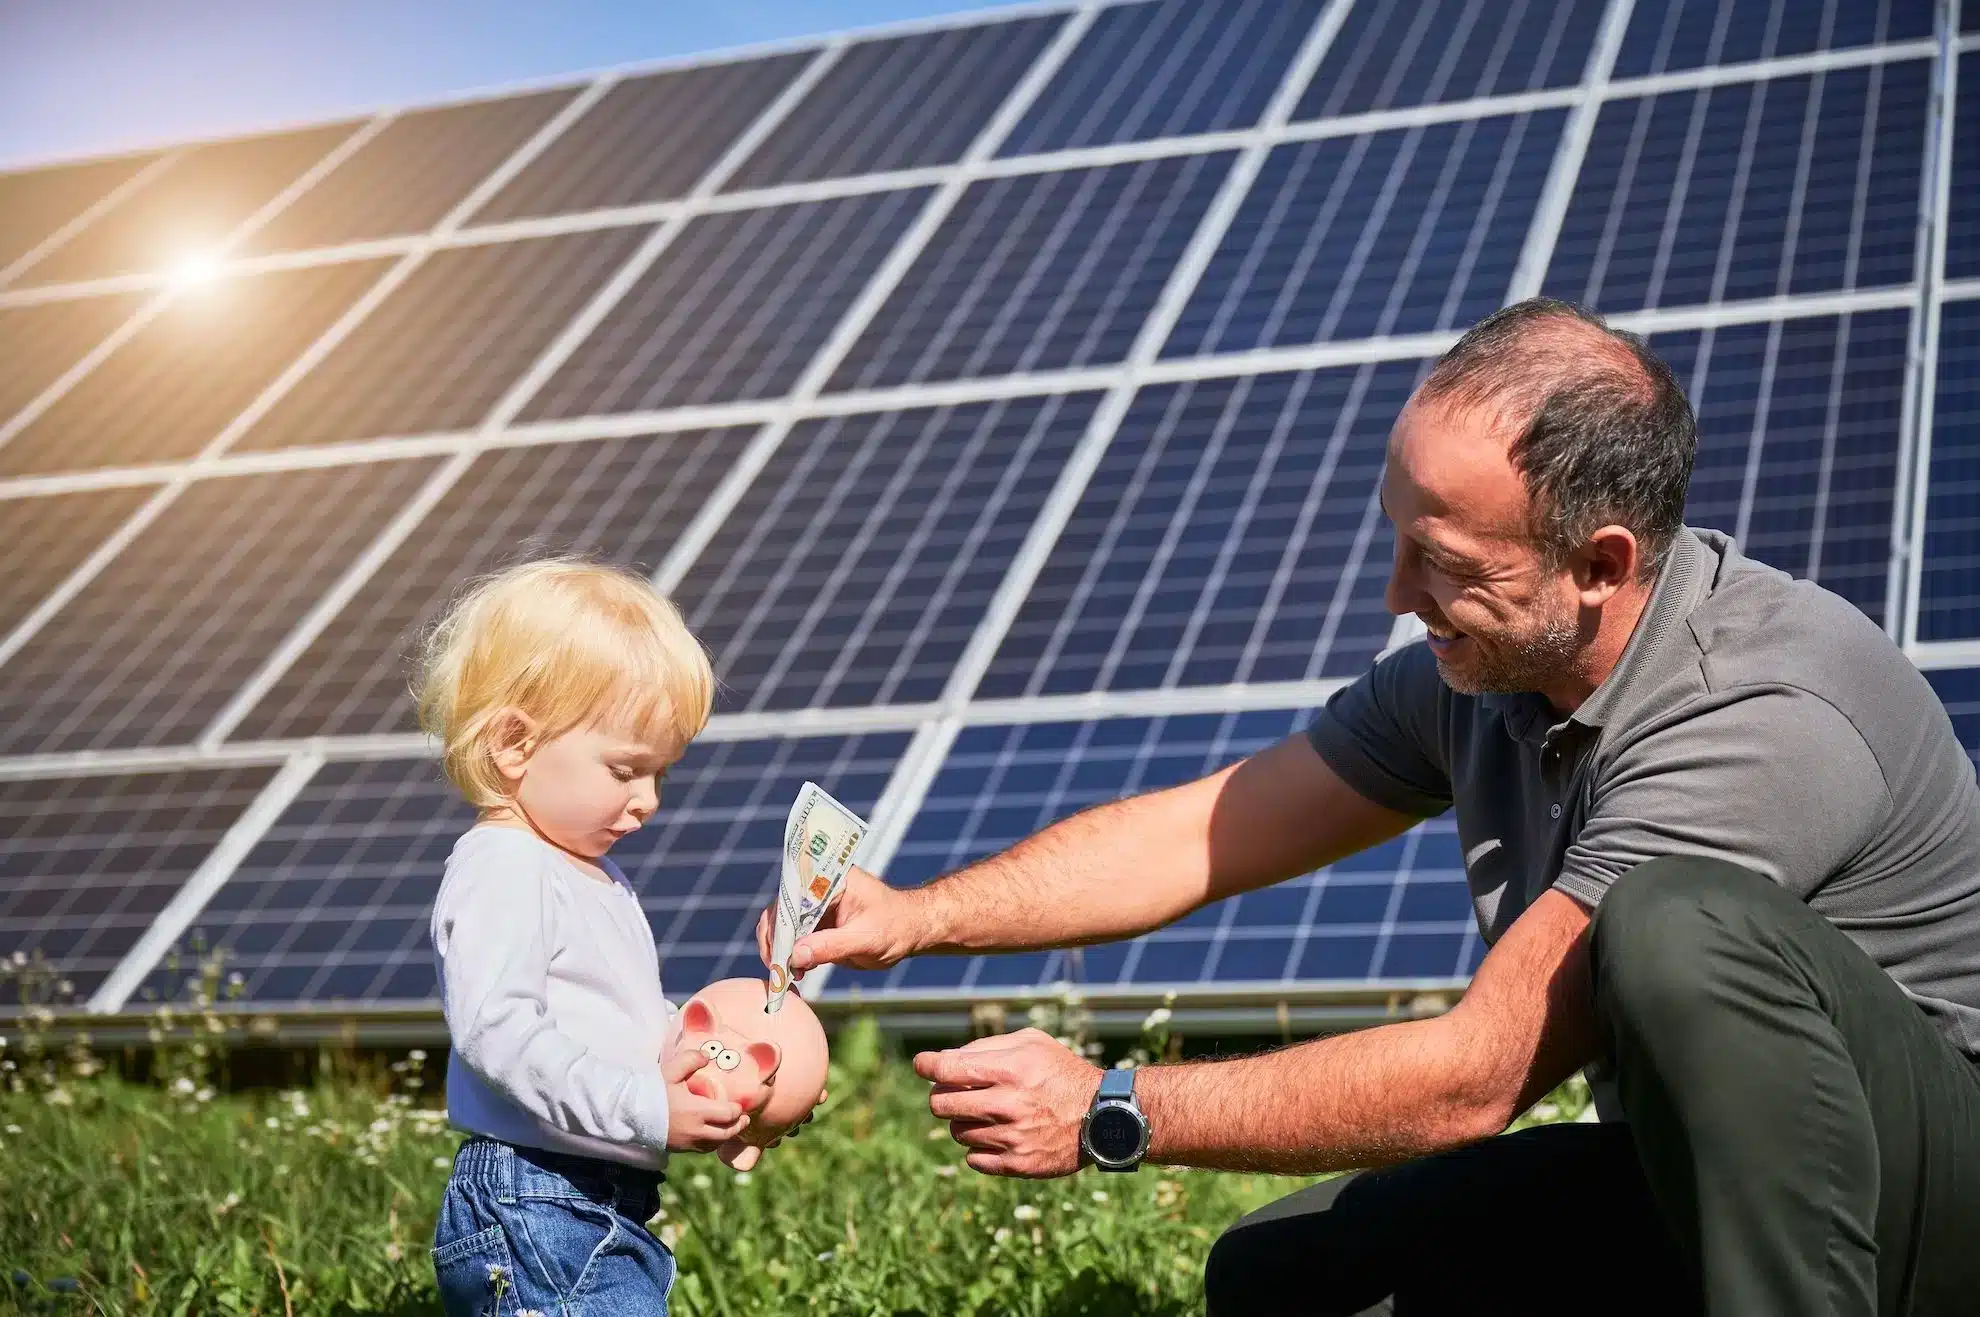 Father teaching child about solar savings